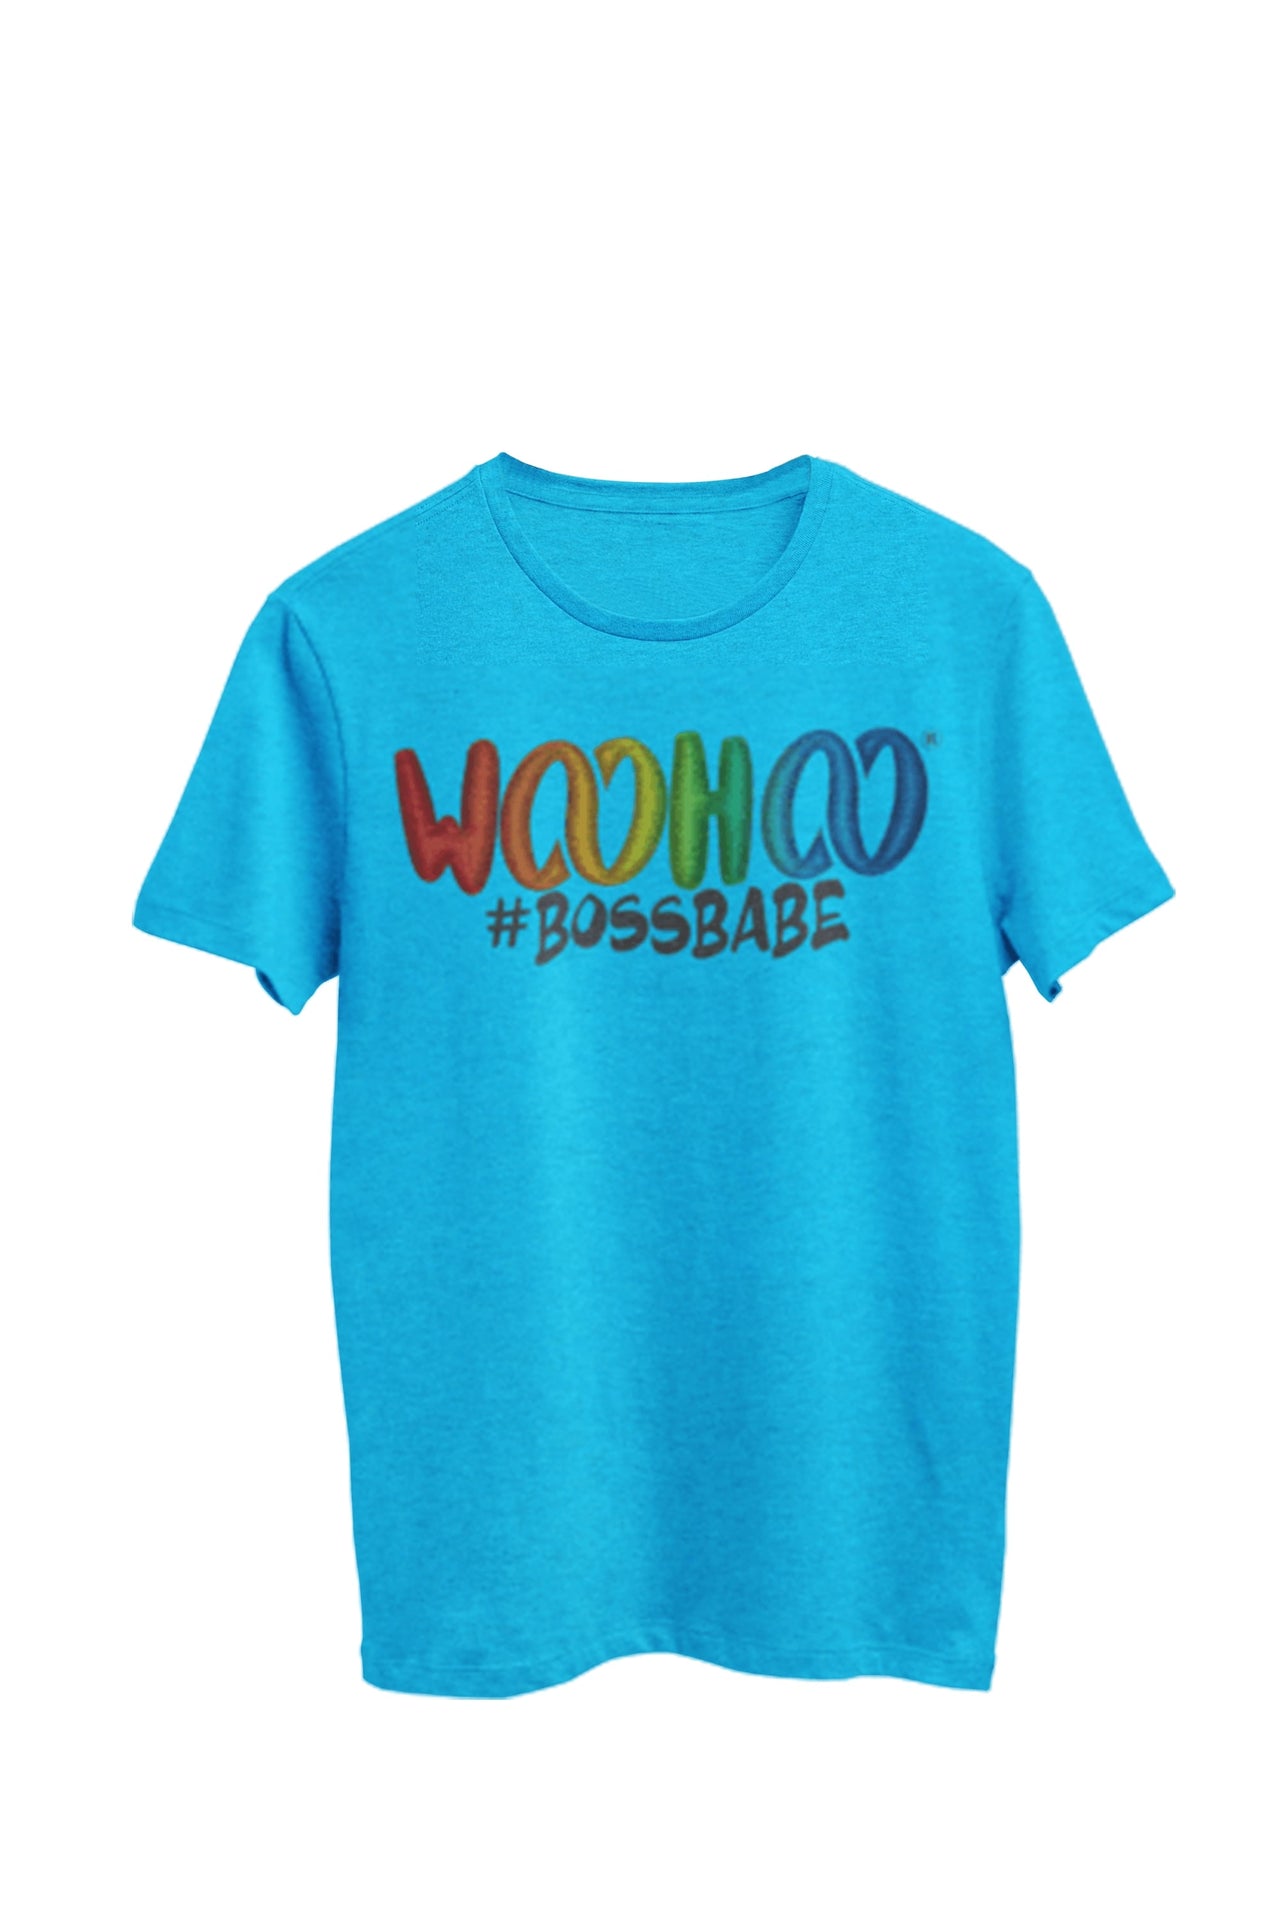 Heather Light Blue Unisex T-shirt with the text 'Woohoo Boss Babe' designed by WooHoo Apparel.